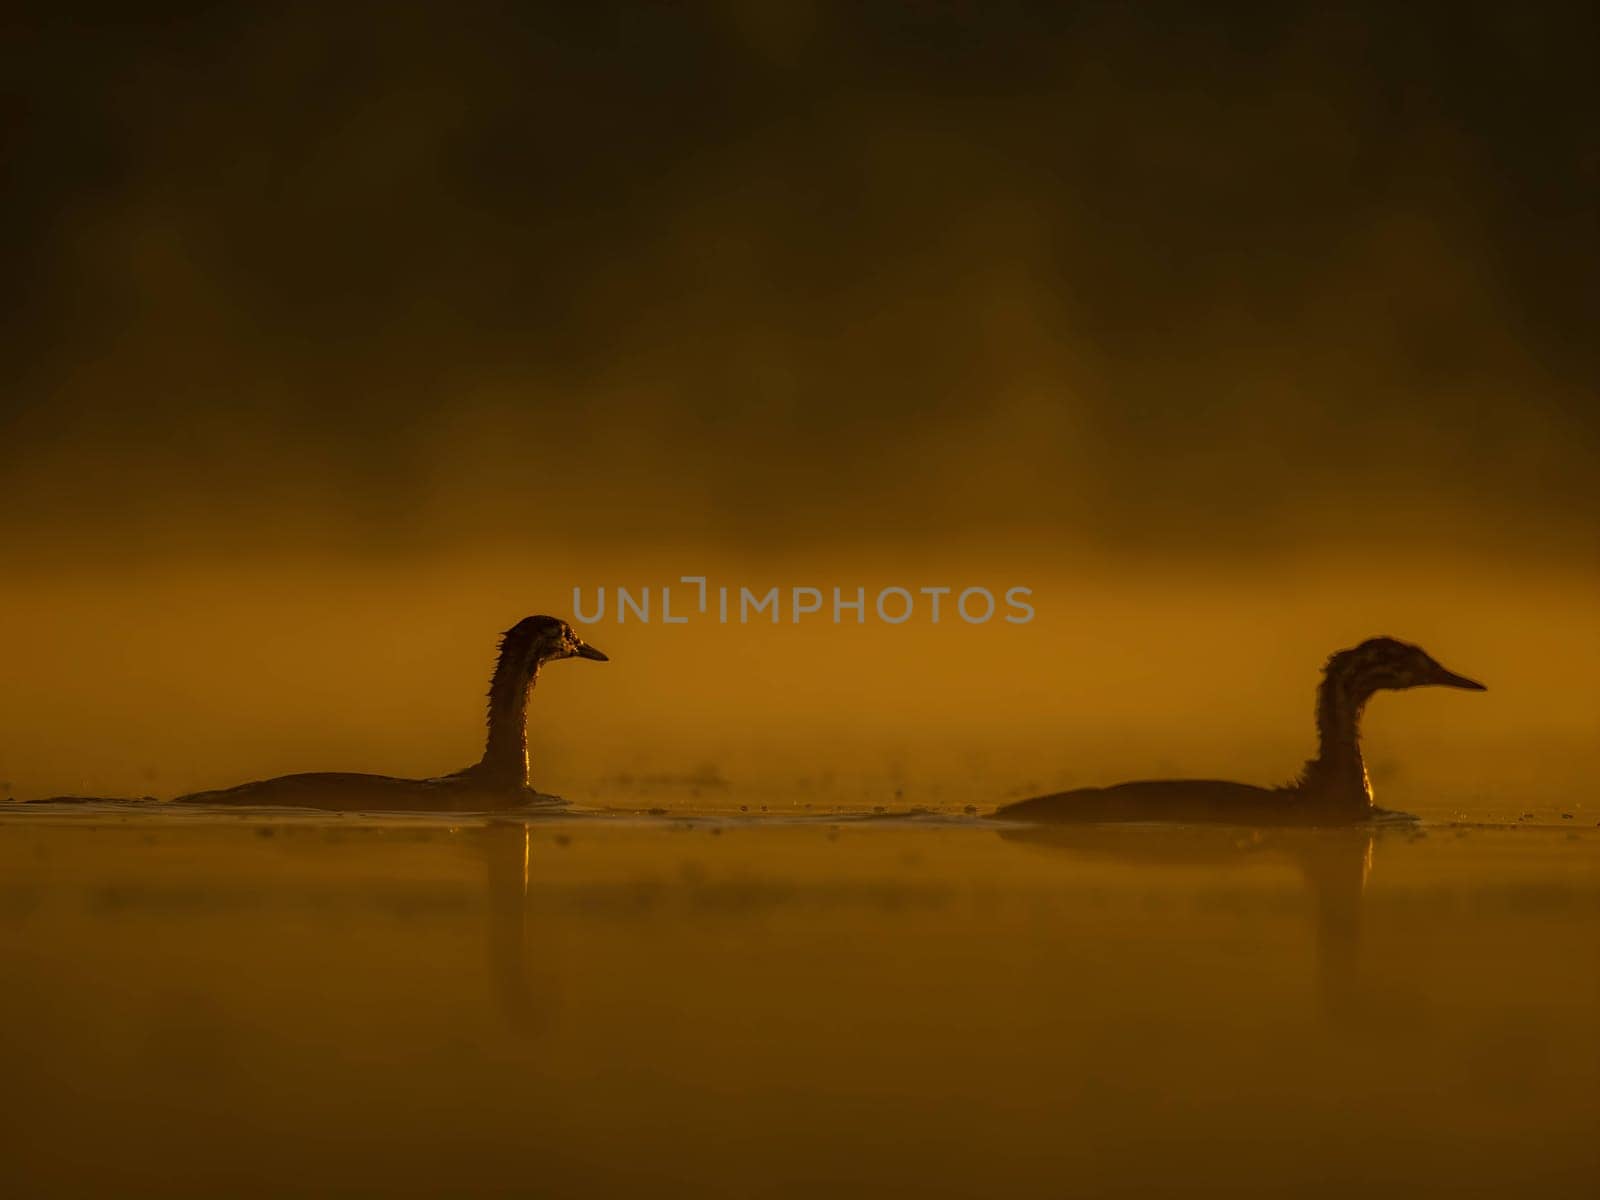 Two ducks glides on sunset-kissed waters, surrounded by the mesmerizing hues of orange. Serene beauty in perfect harmony.